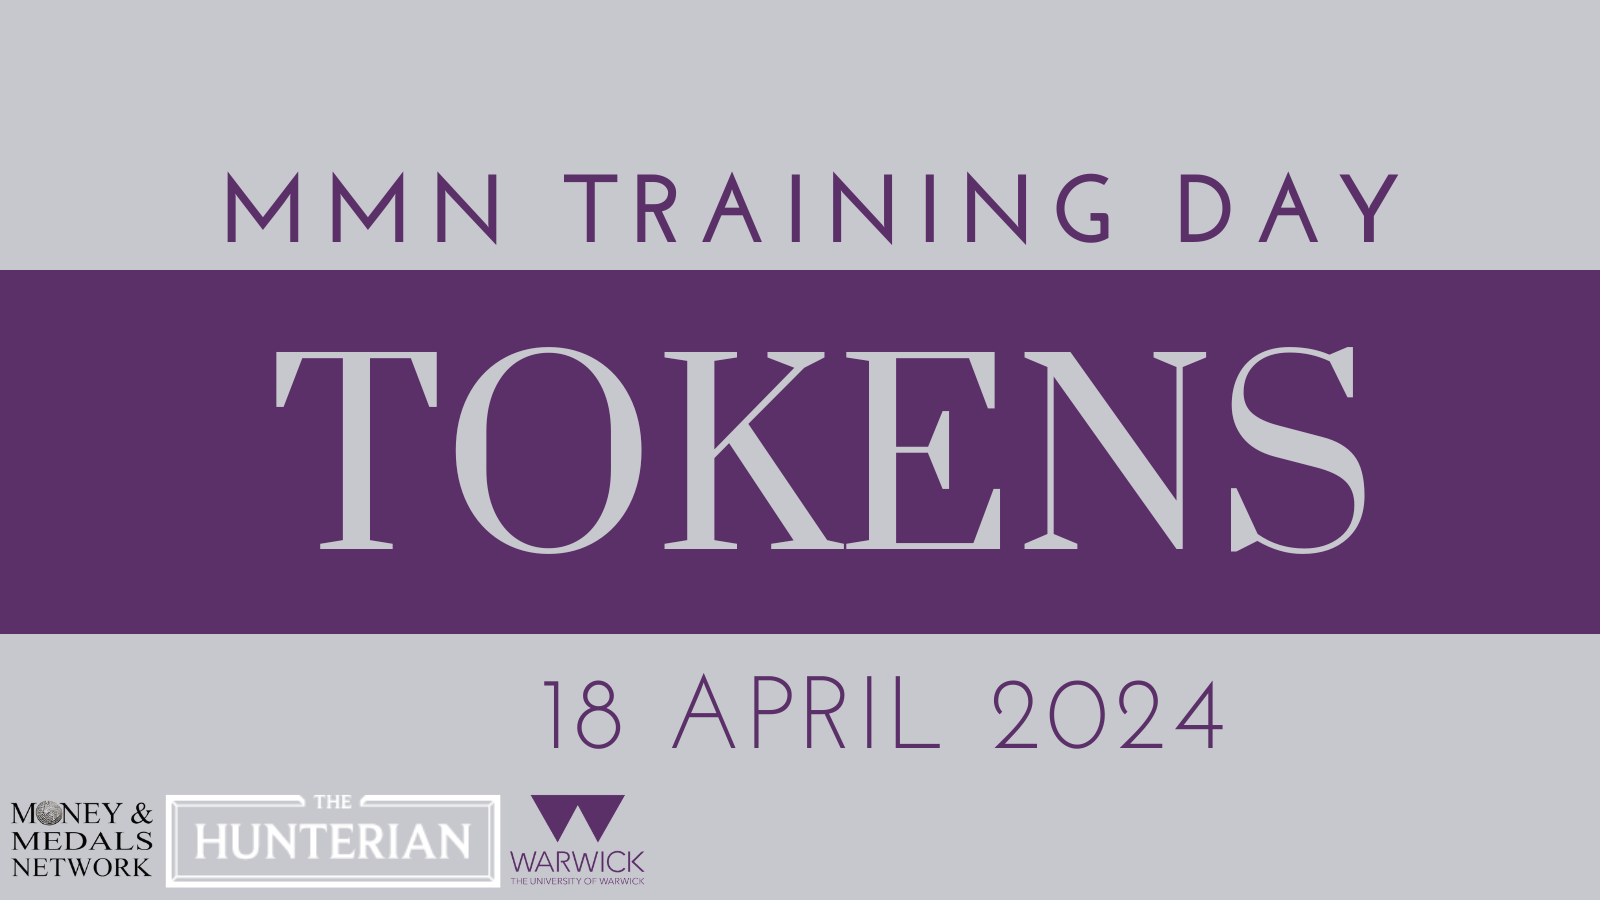 Training Day - Tokens